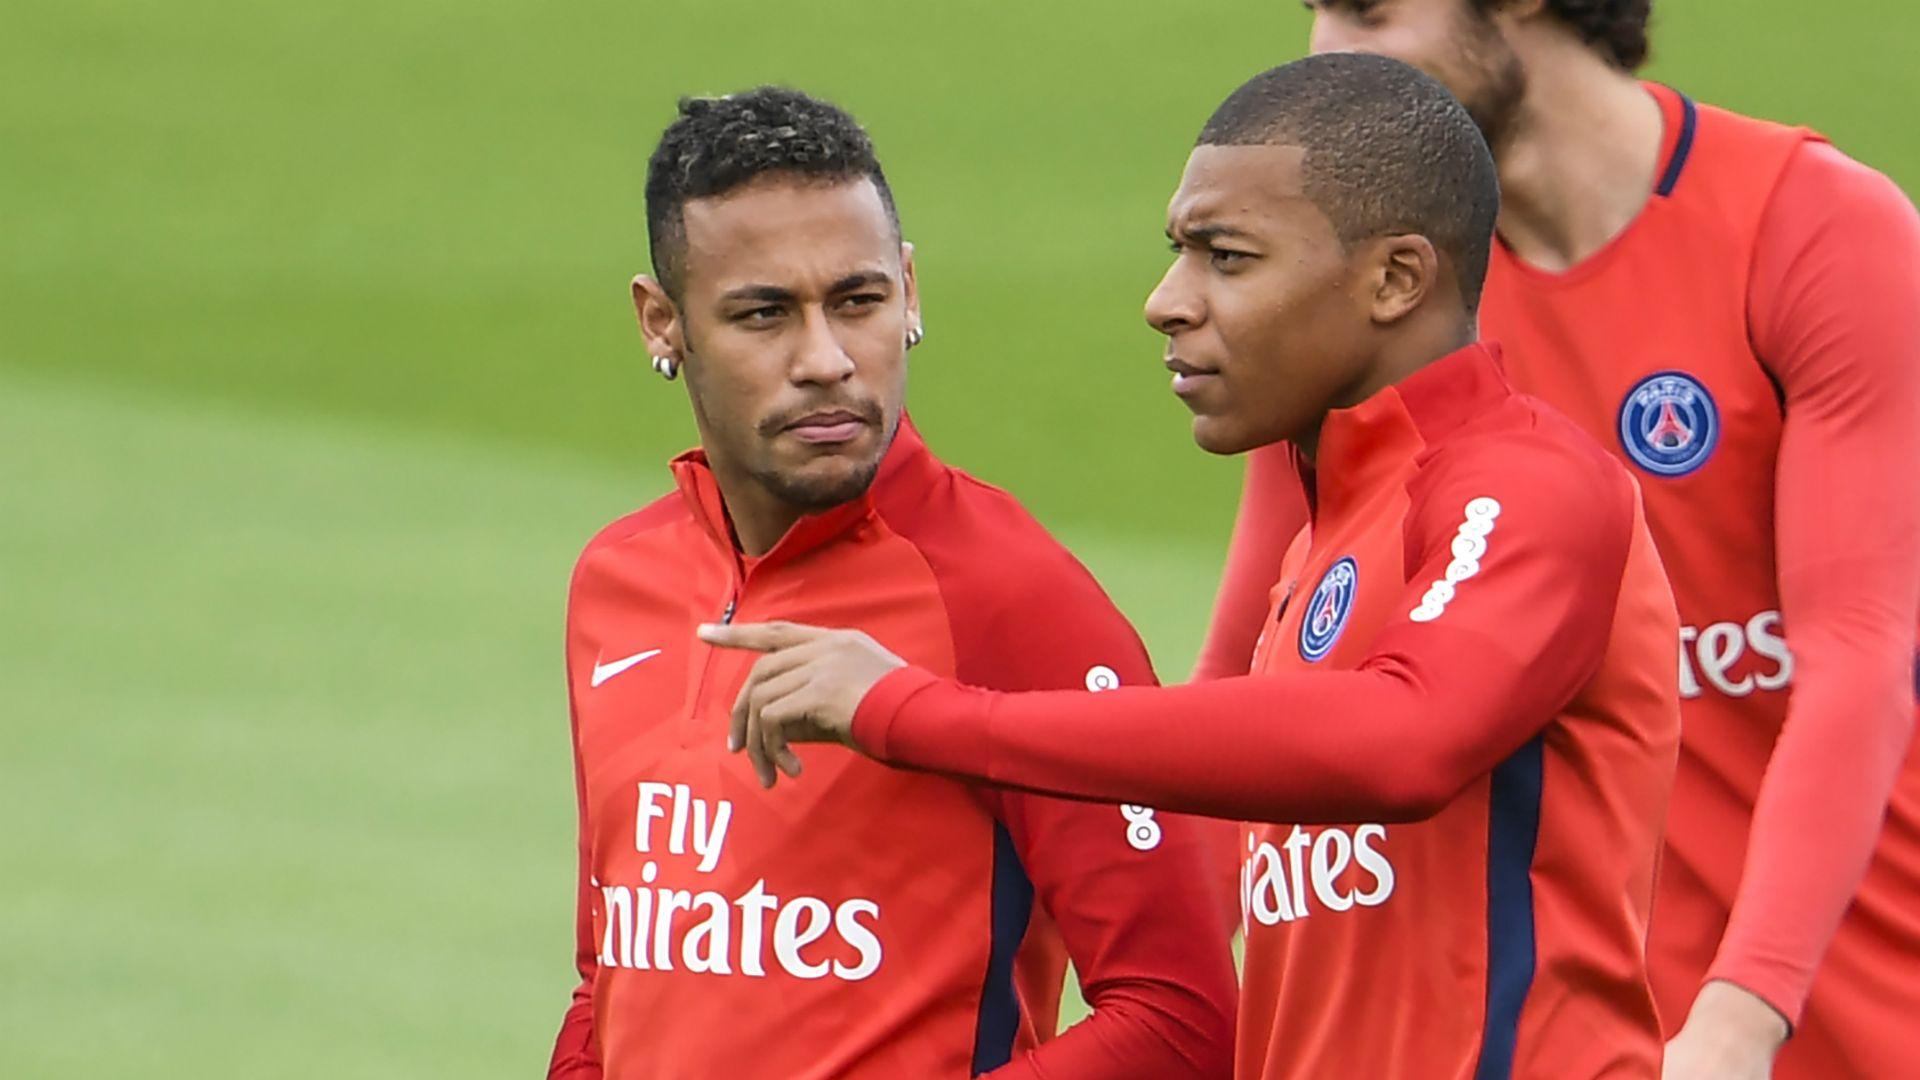 Kylian Mbappe named in PSG squad to face Metz as debut nears